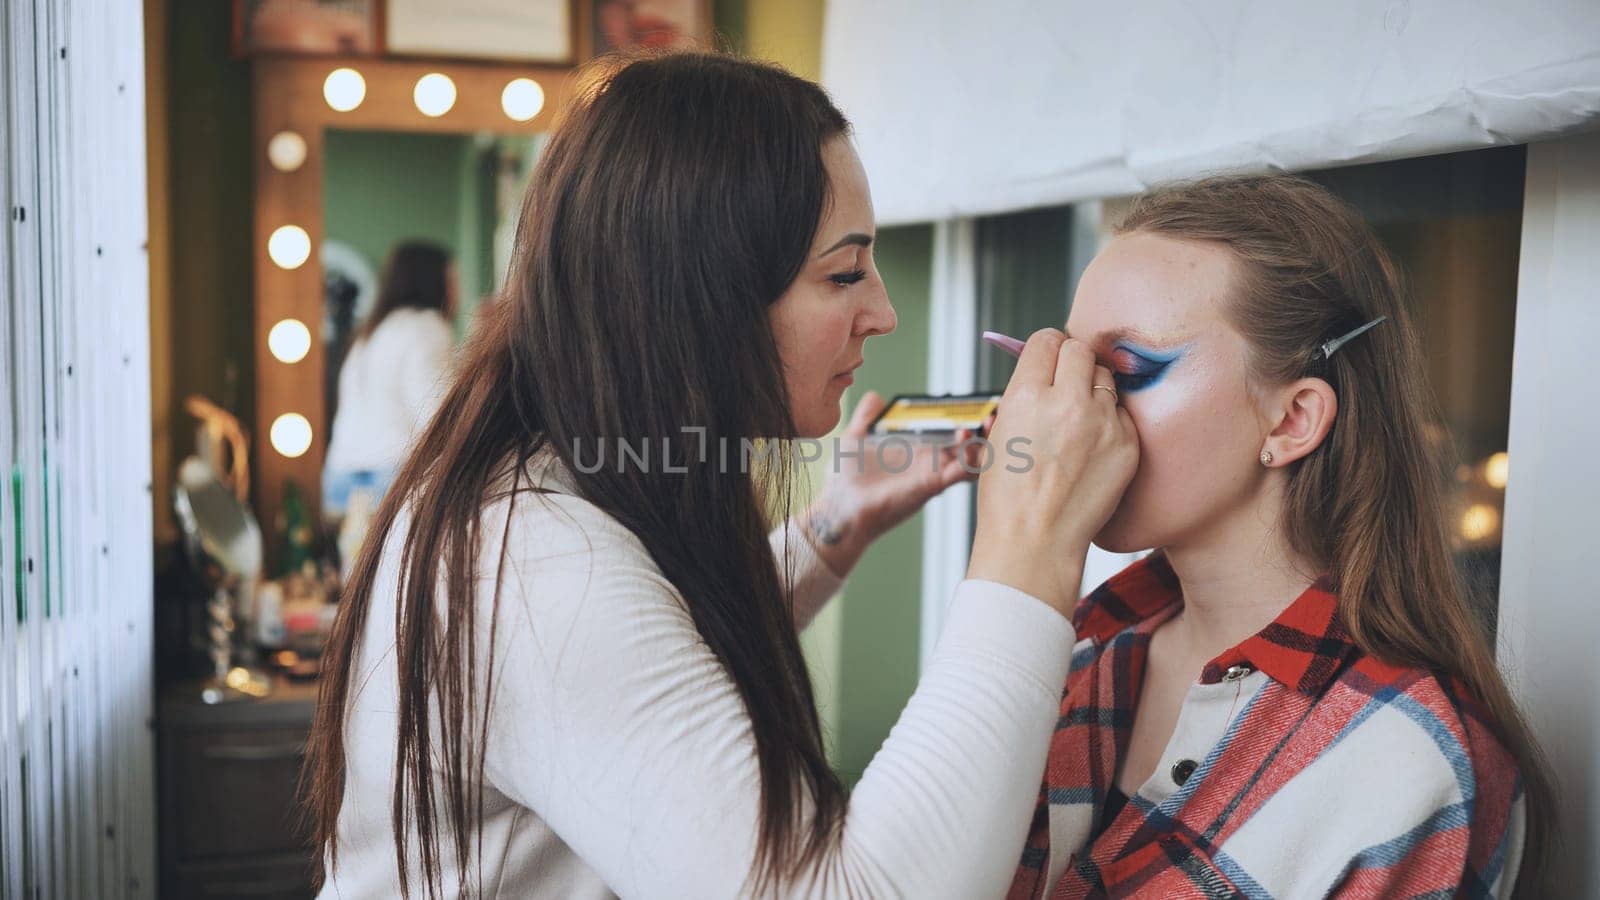 The makeup artist paints the model's eyes